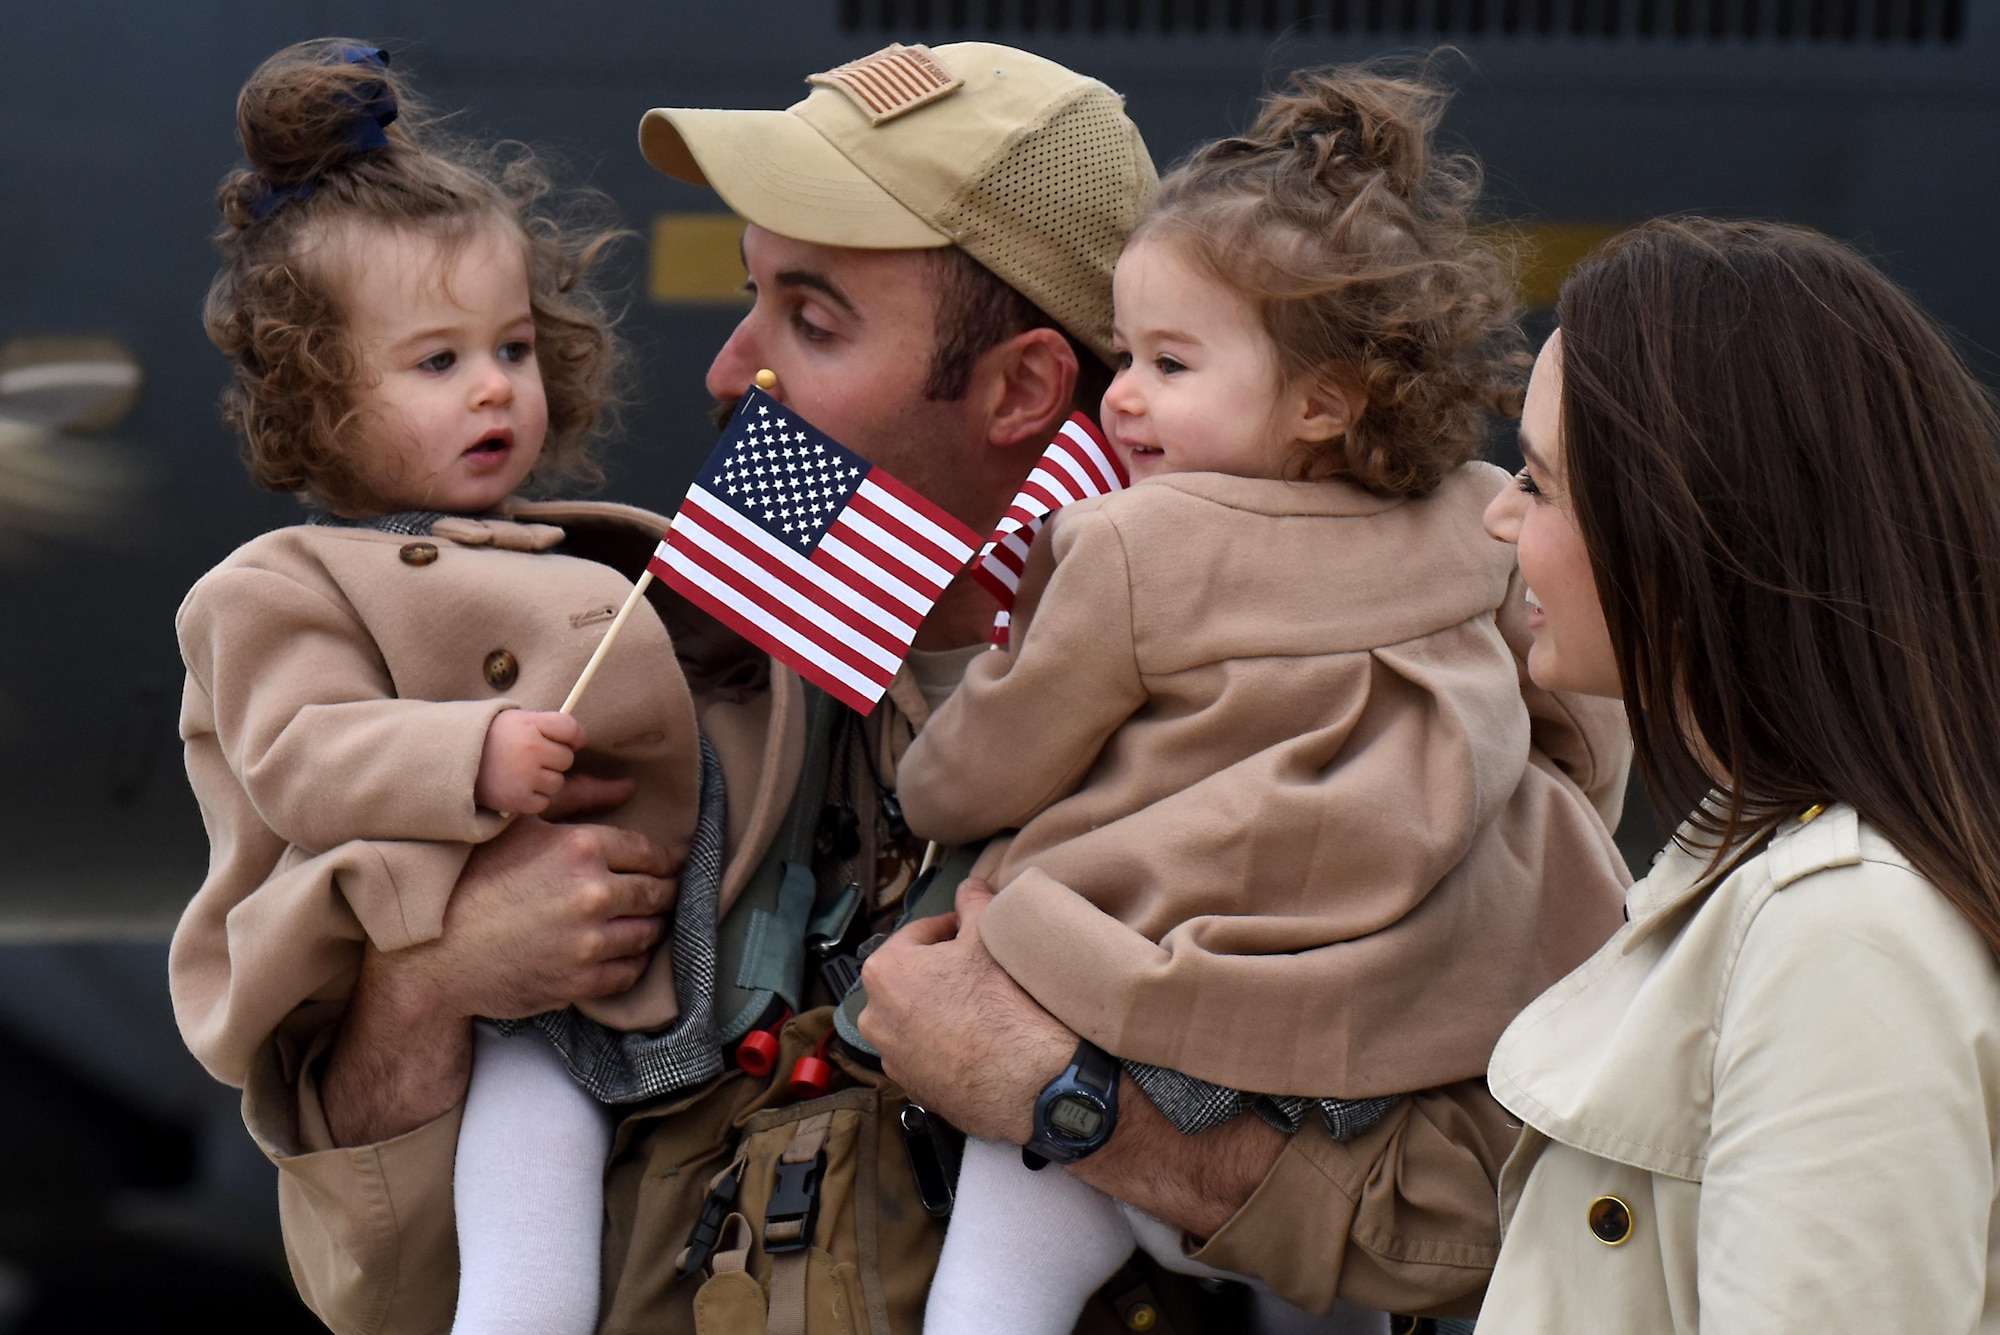 A 492nd Fighter Squadron member greets his family members after returning from a deployment, Oct. 4. While deployed as the 492nd Expeditionary Fighter Squadron at the 332nd Air Expeditionary Wing, the “Bolars” completed nearly 11,000 flying hours and over 2,000 missions while delivering nearly 4,500 precision-guided munitions in support of U.S. Central Command operations. (U.S. Air Force photo/Airman 1st Class Eli Chevalier)